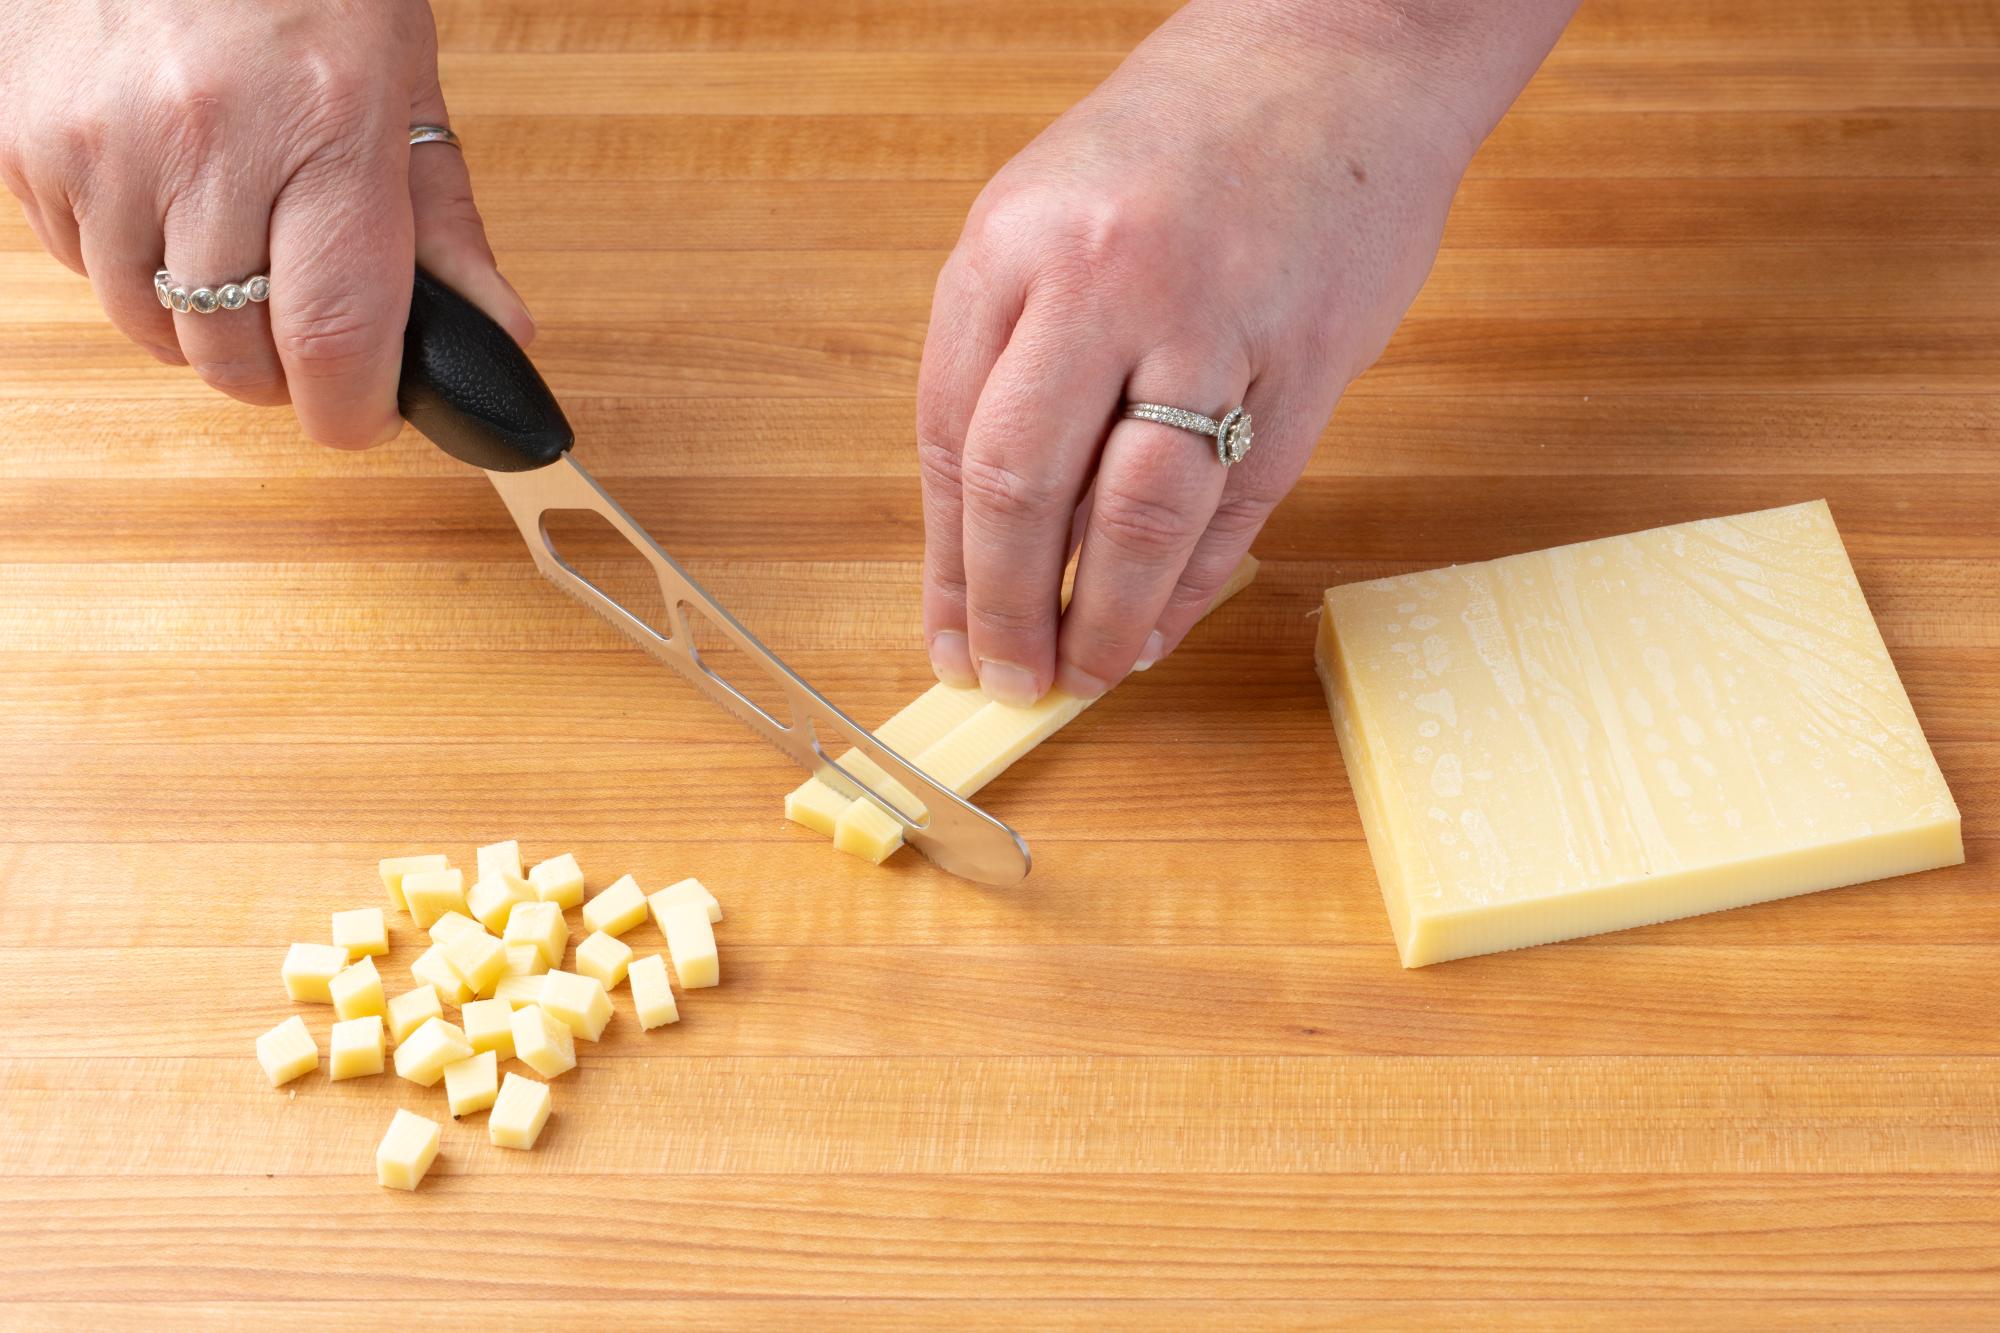 Cube the Gruyere cheese using a Cheese Knife.